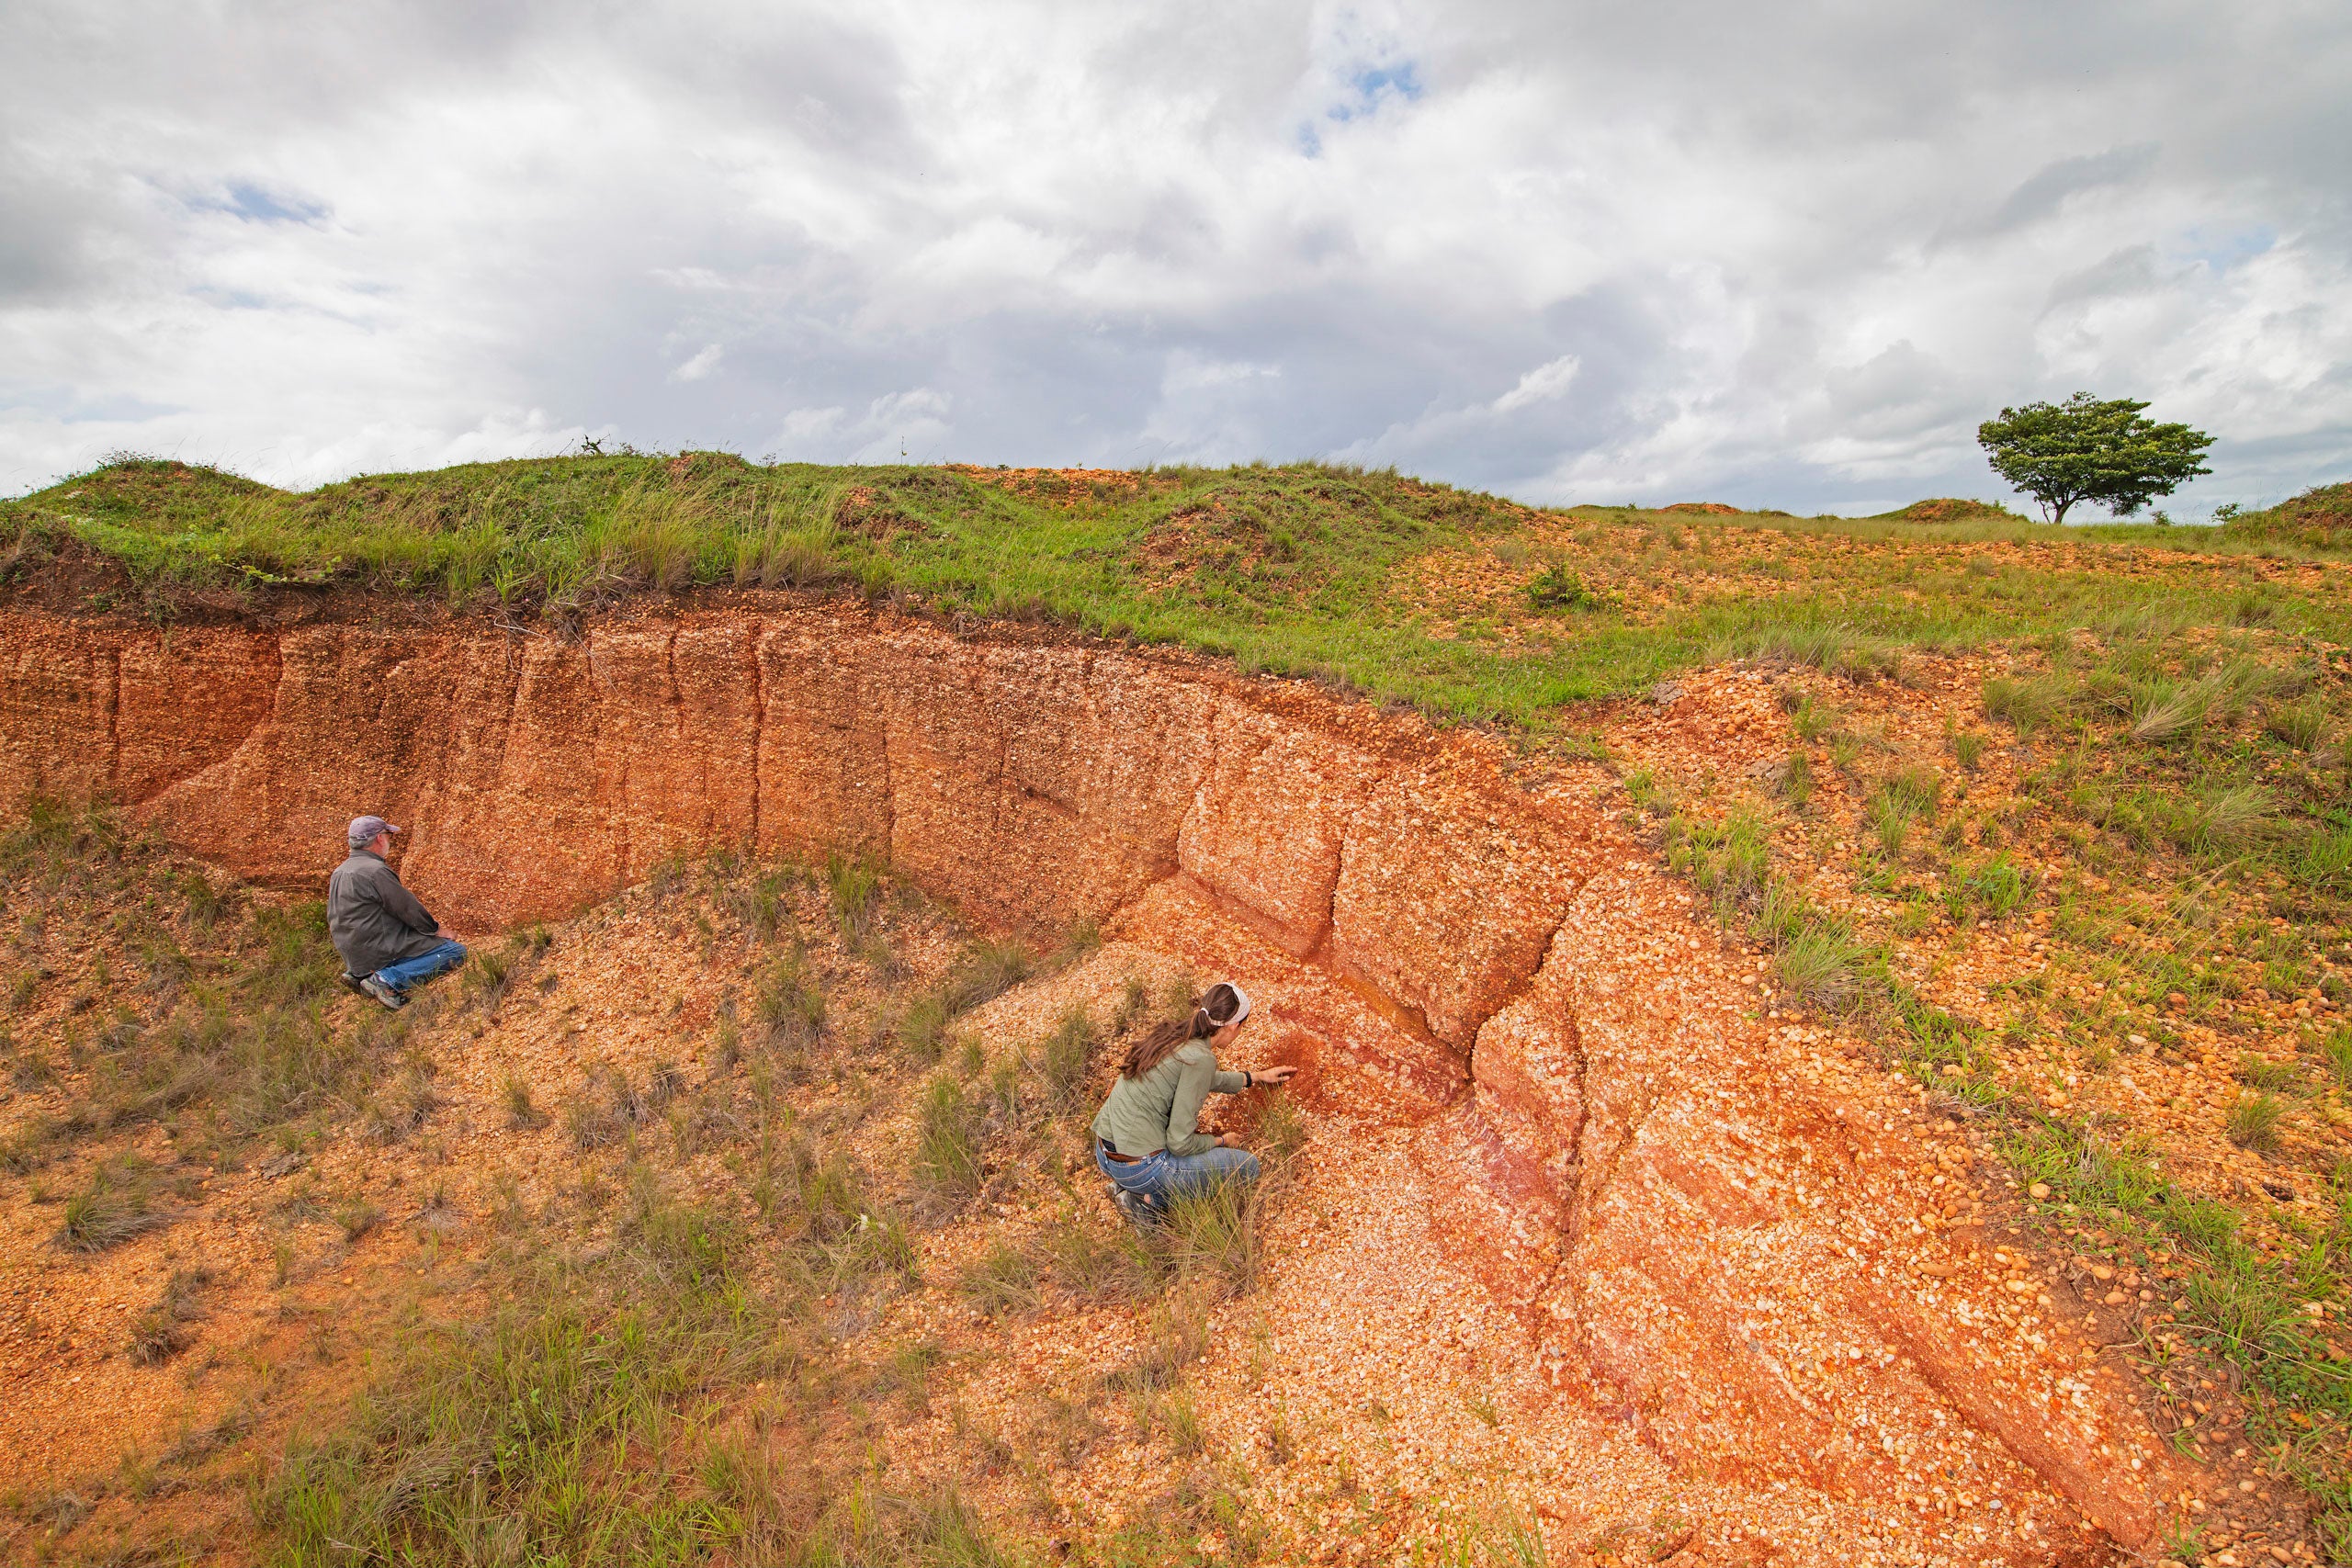 Researchers Exequiel Ezcurra (UC Riverside) and Paula Ezcurra (Climate Science Alliance) explore the exposed quarries in the lands surrounding the San Pedro Mártir River in Tabasco, Mexico, to better understand the geologic history of this region. (Photo: Octavia Aburto)